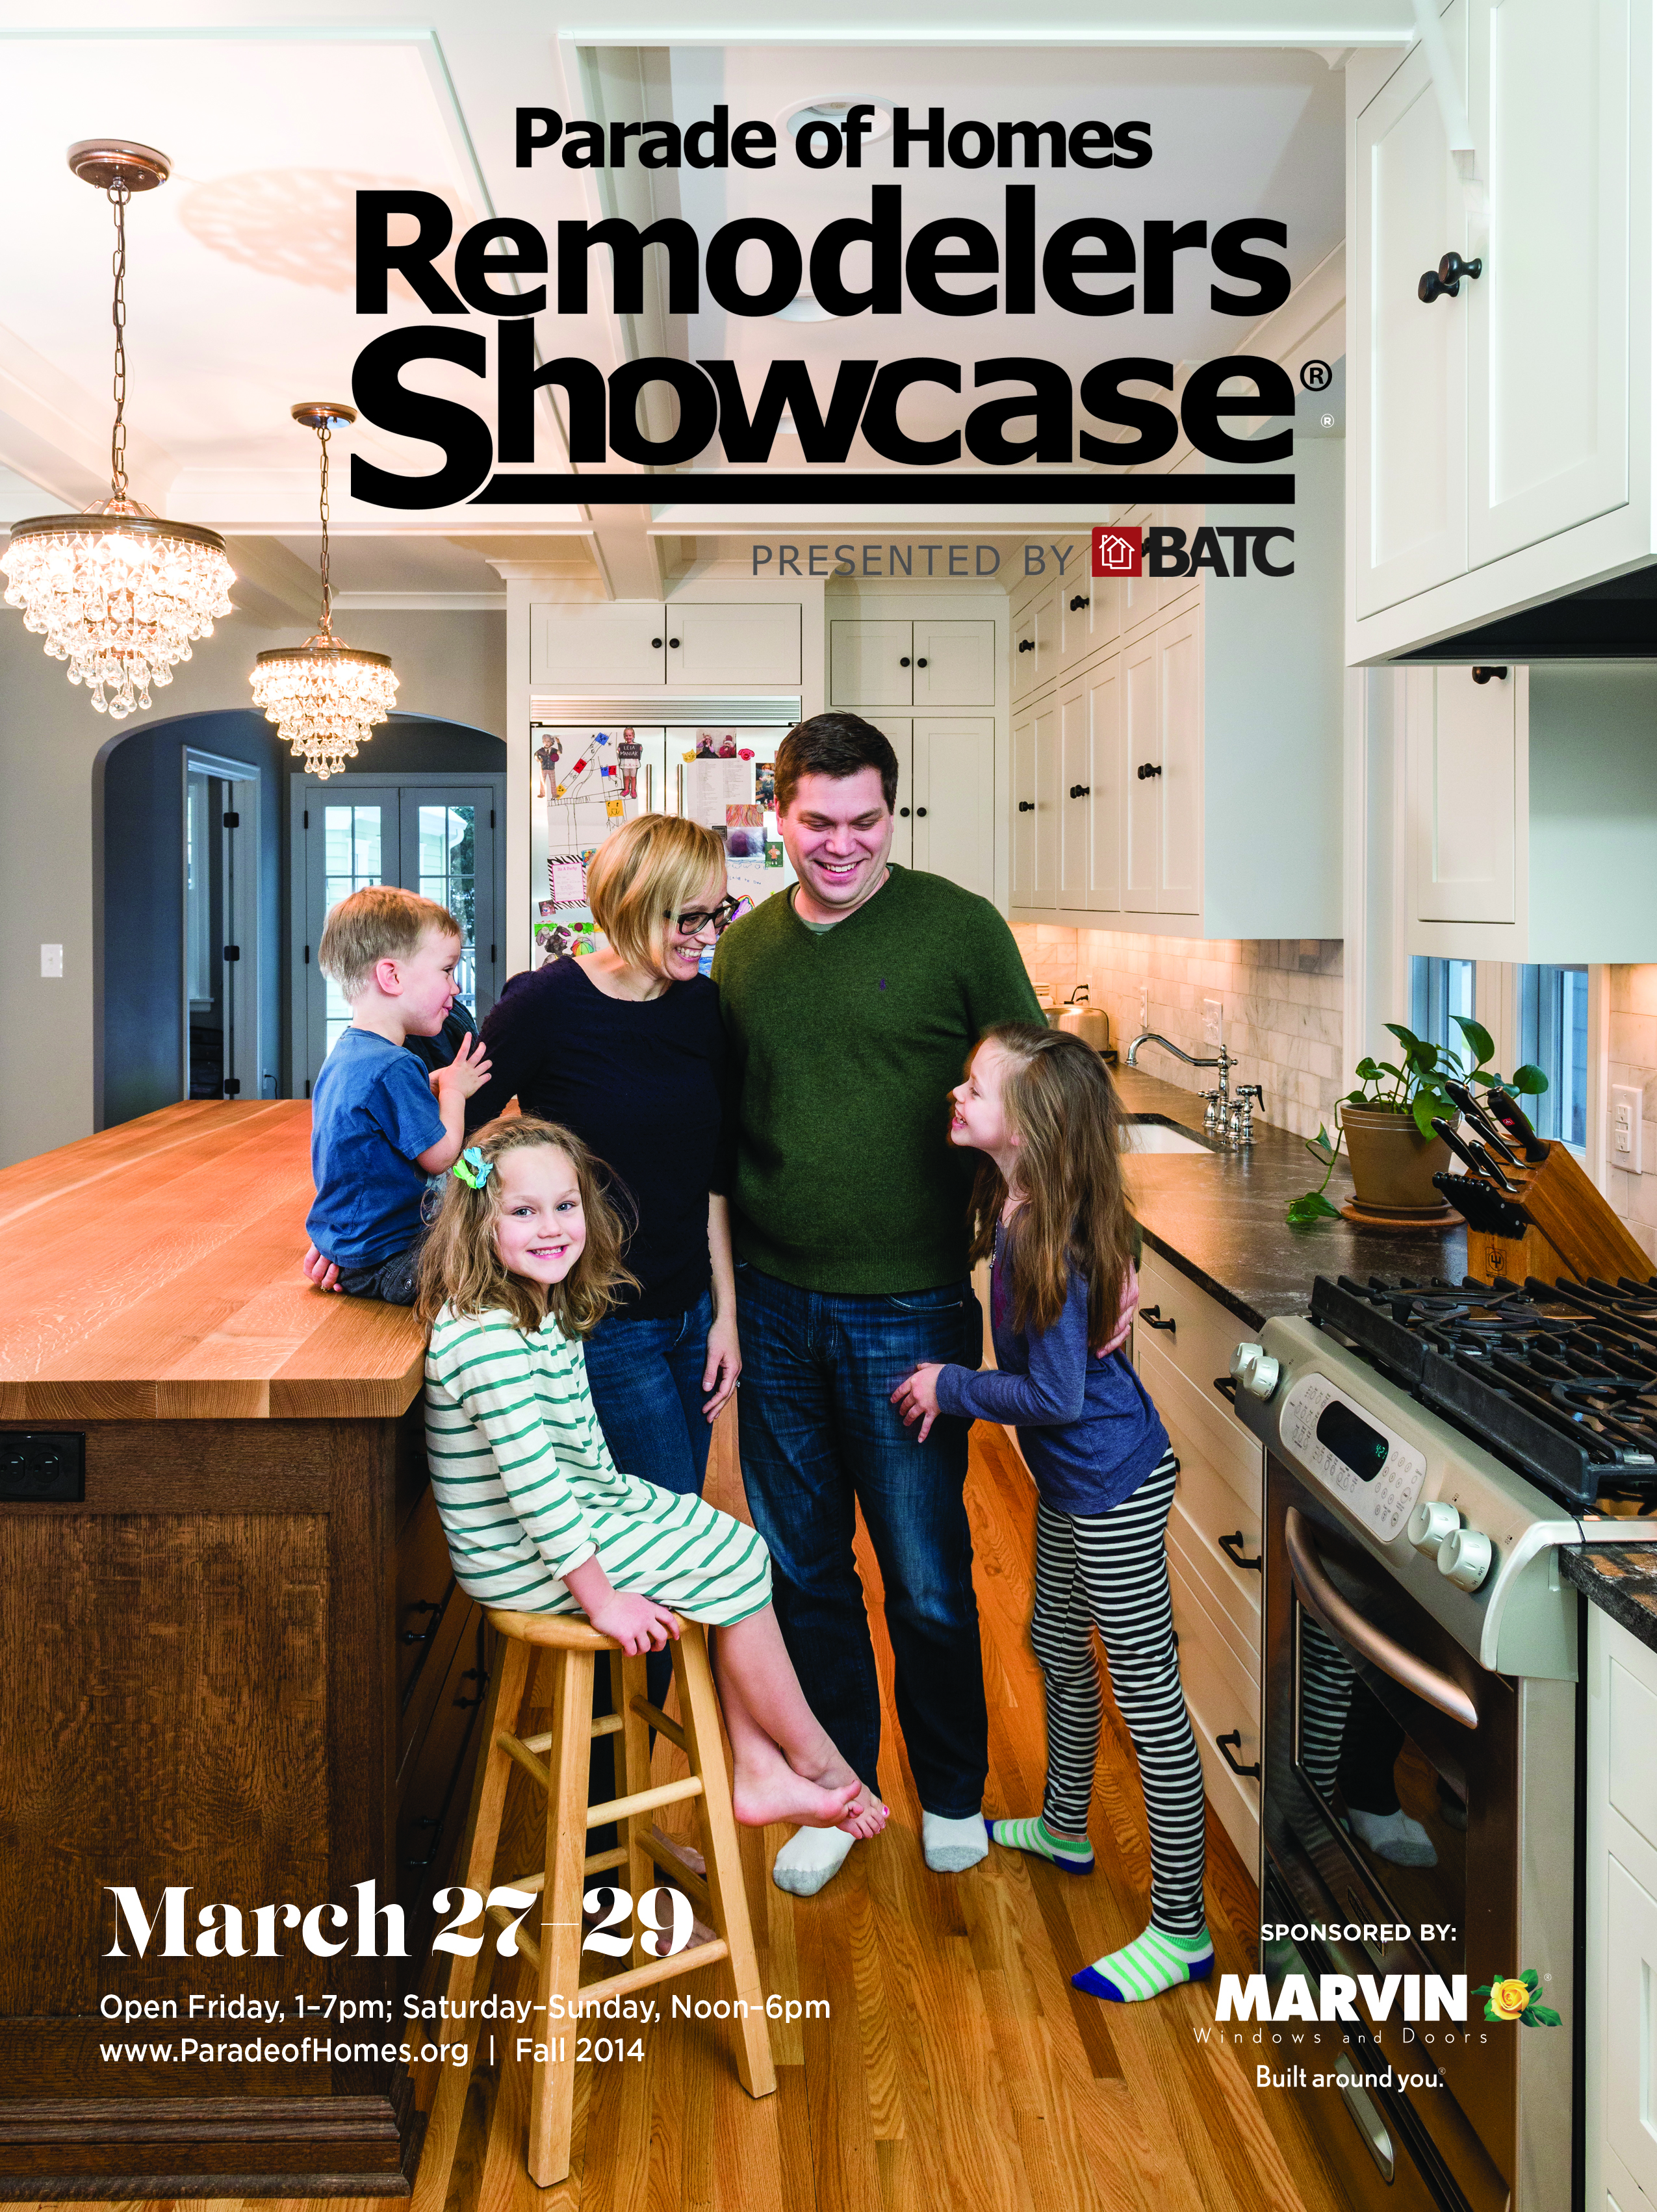 Image for Spring 2015 Parade of Homes Remodelers Showcase® Runs March 27-29th